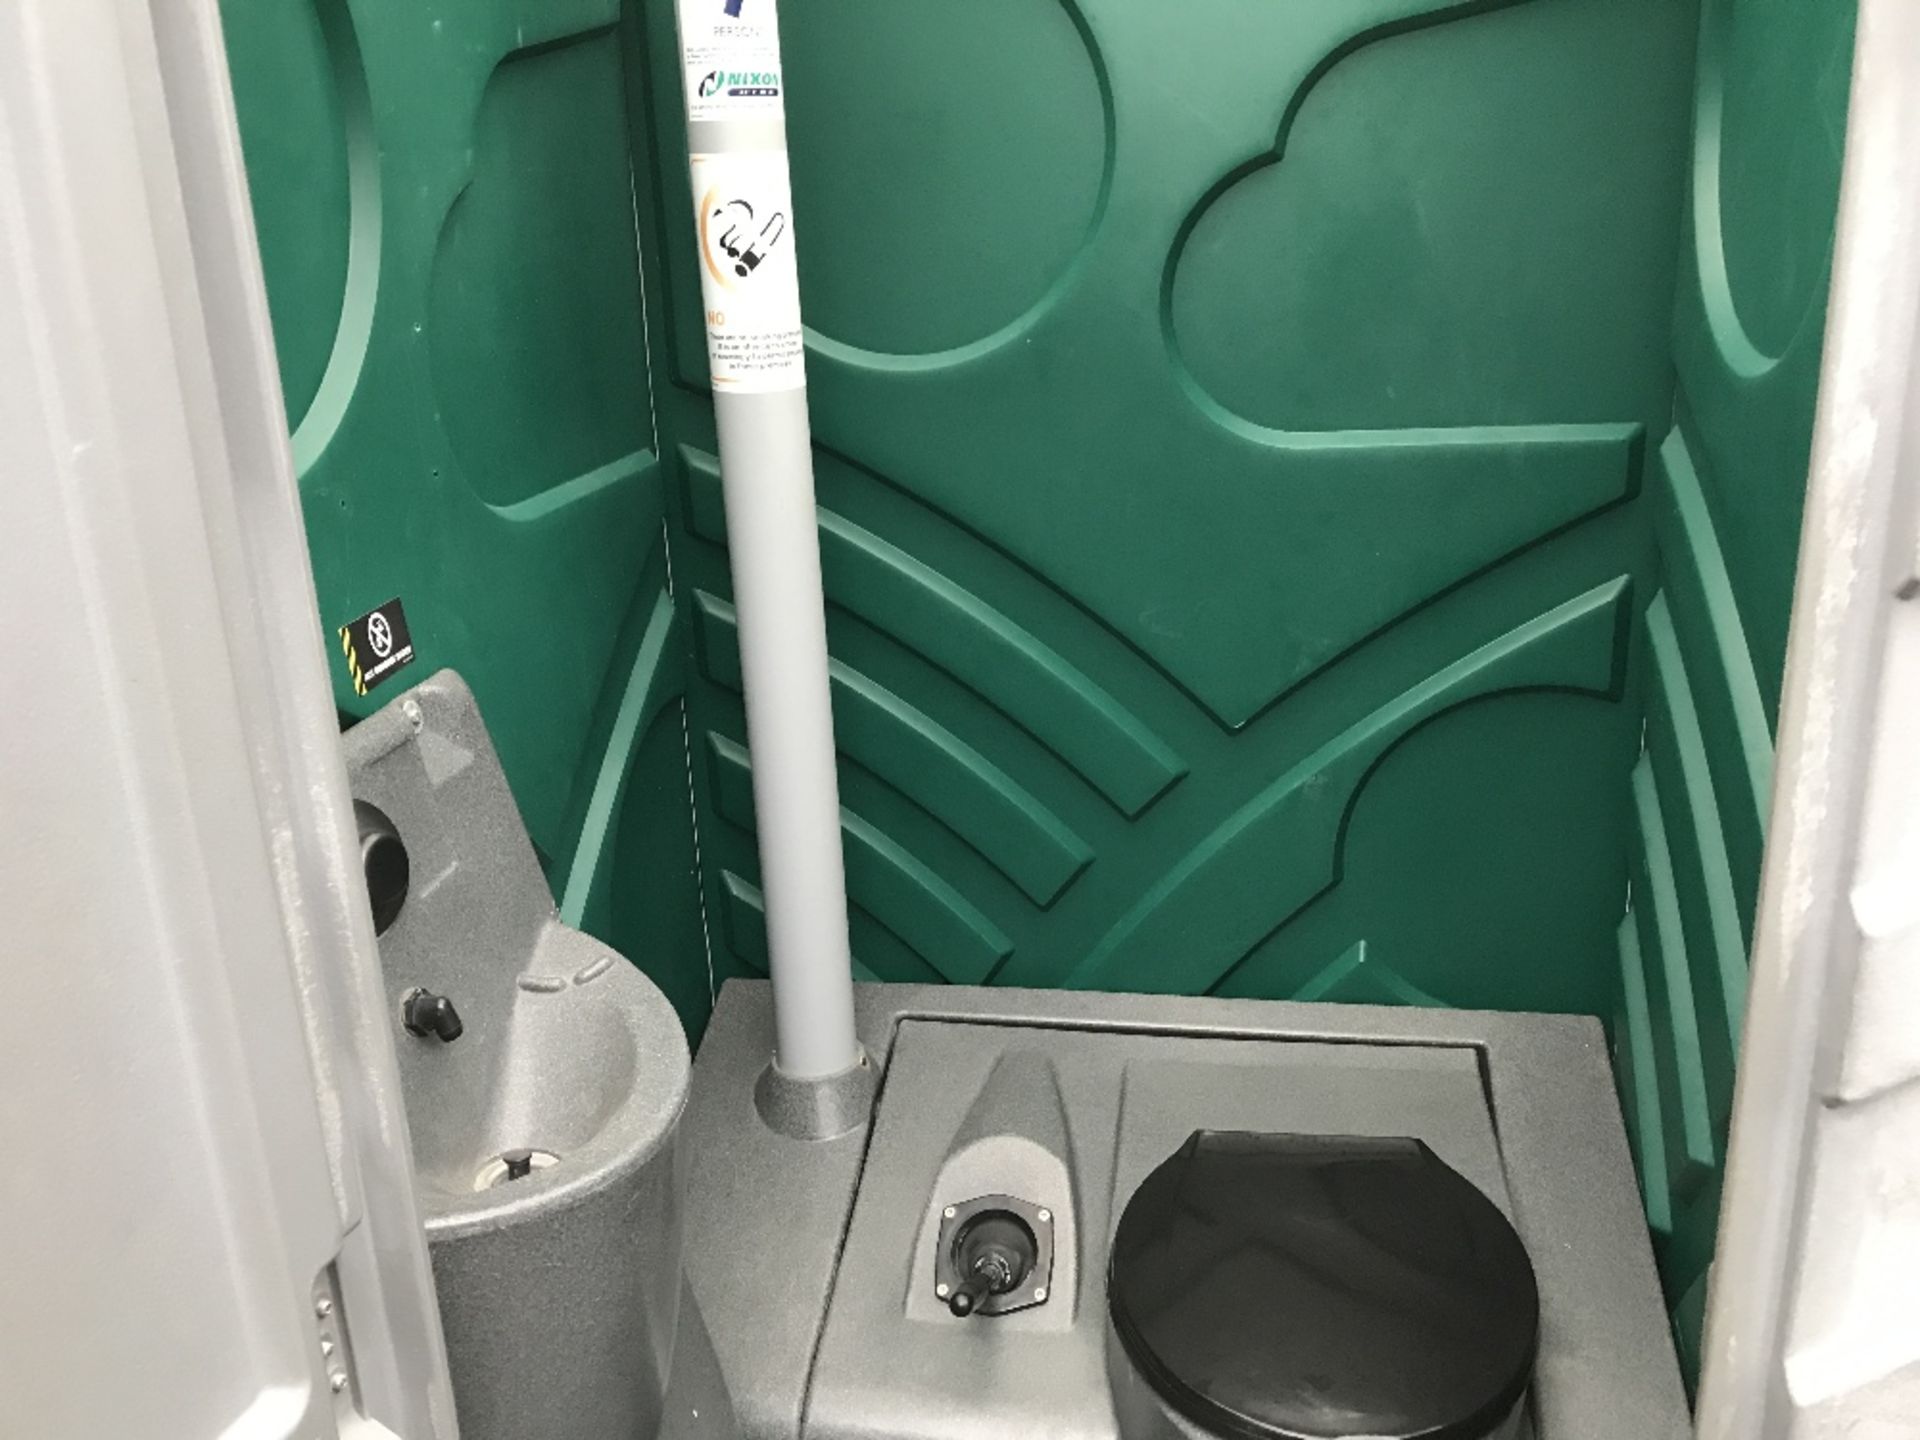 GREEN COLOURED PORTABLE EVENTS/SITE TOILET